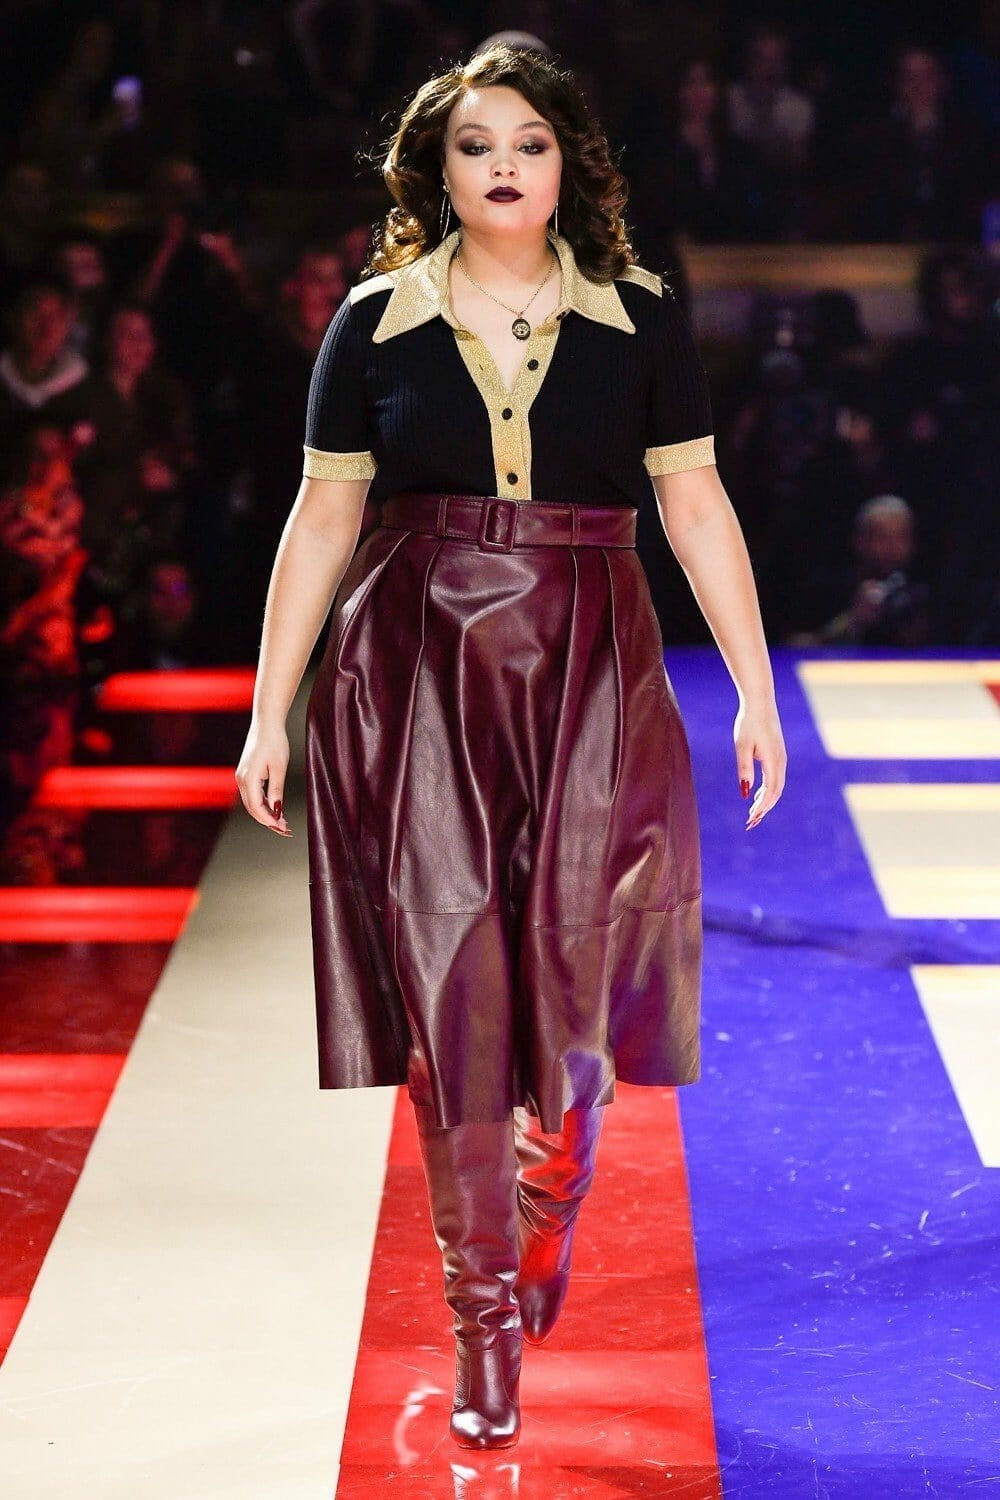 Solrig Bil Rekvisitter Tommy Hilfiger Ready-to-Wear Fall-Winter 2019-2020 - RUNWAY MAGAZINE ®  Collections